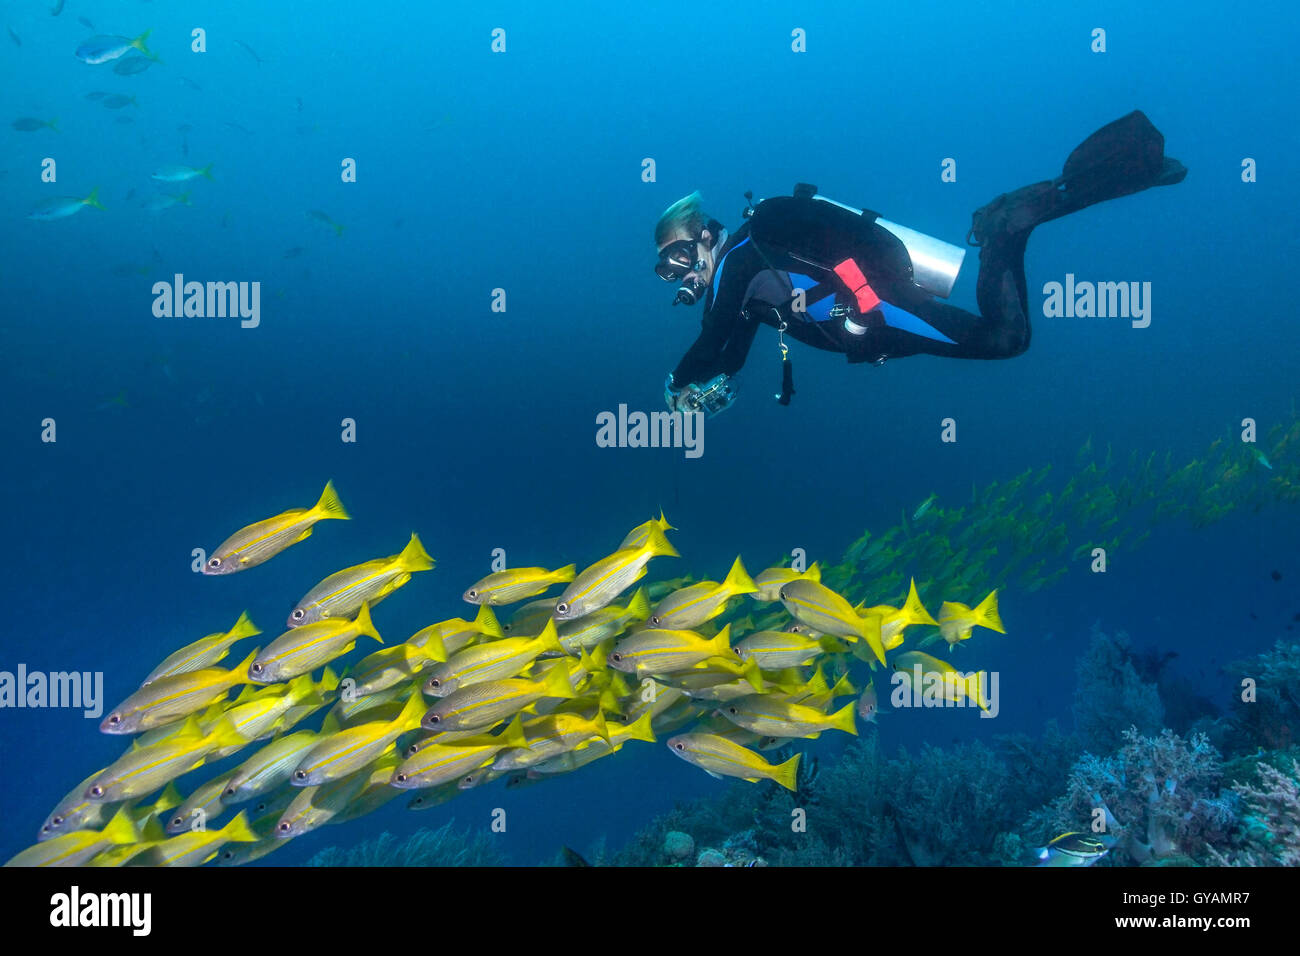 Scuba diver swims with school of yellowtail snapper fish. Stock Photo